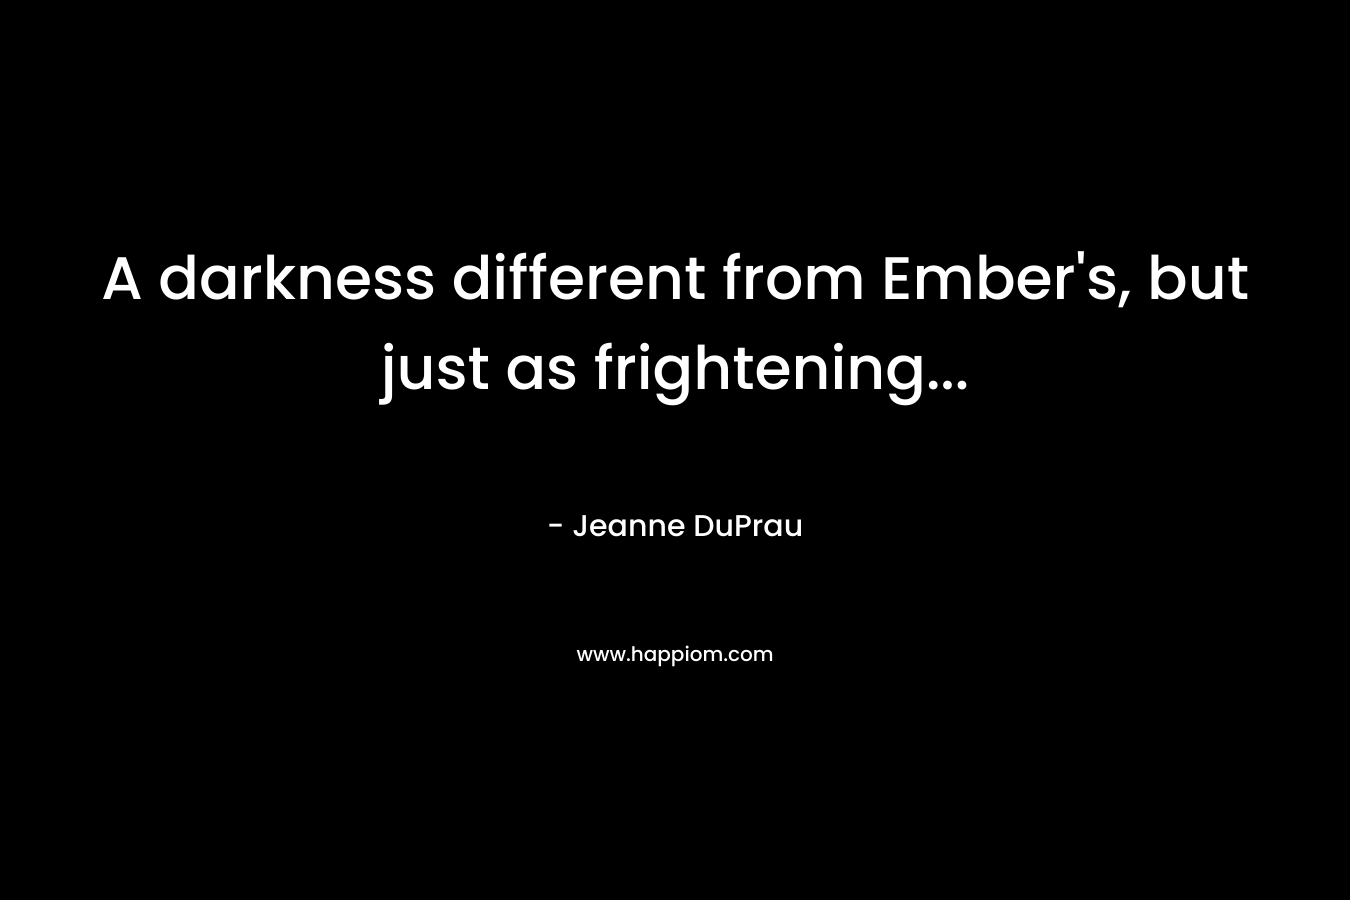 A darkness different from Ember's, but just as frightening...